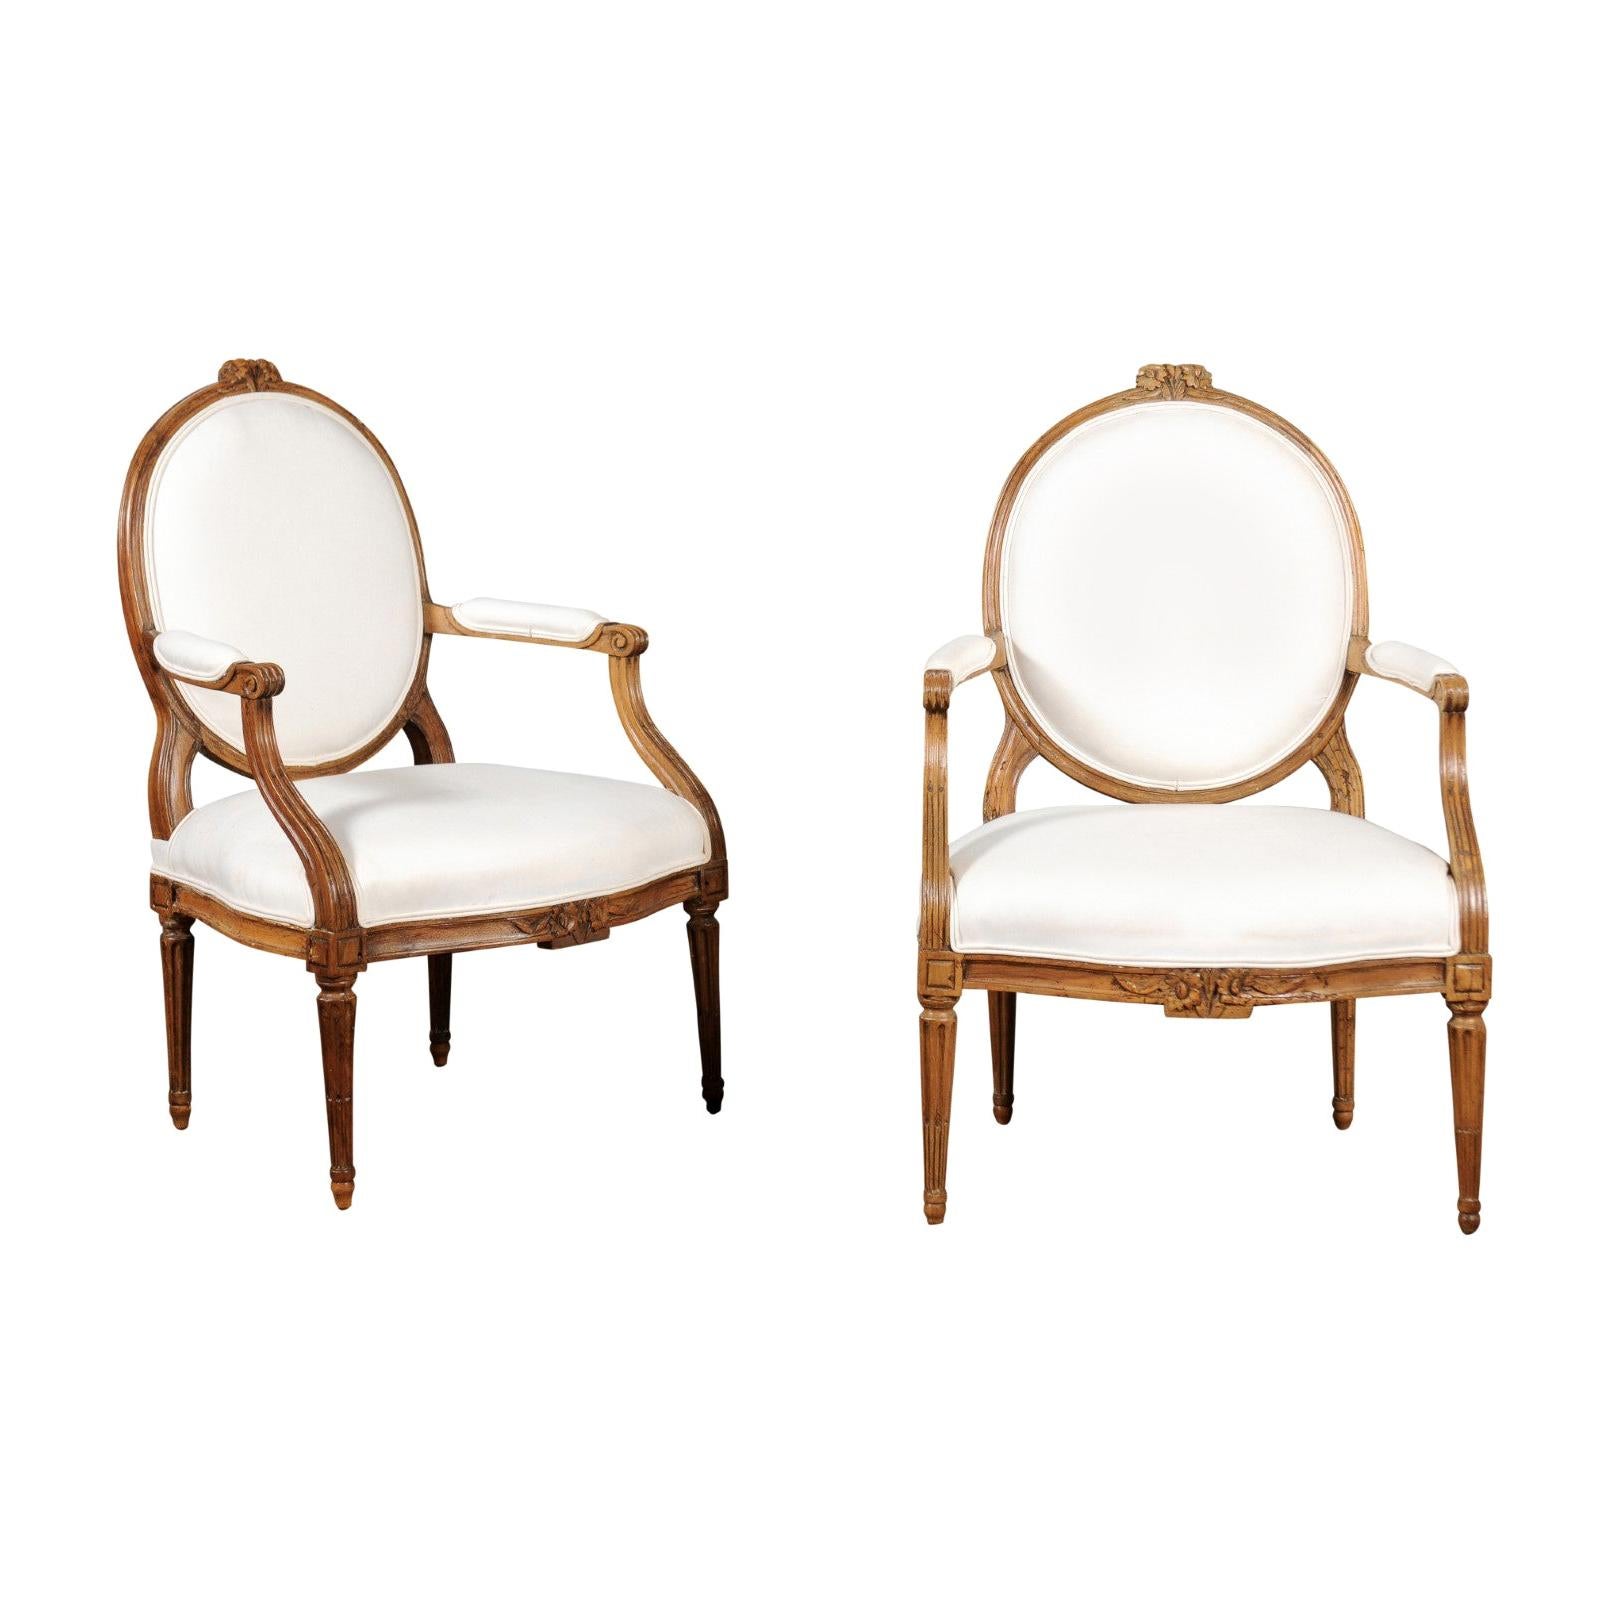 Pair of Louis XVI Style 19th Century Oval Back Fauteuils with Floral Motifs